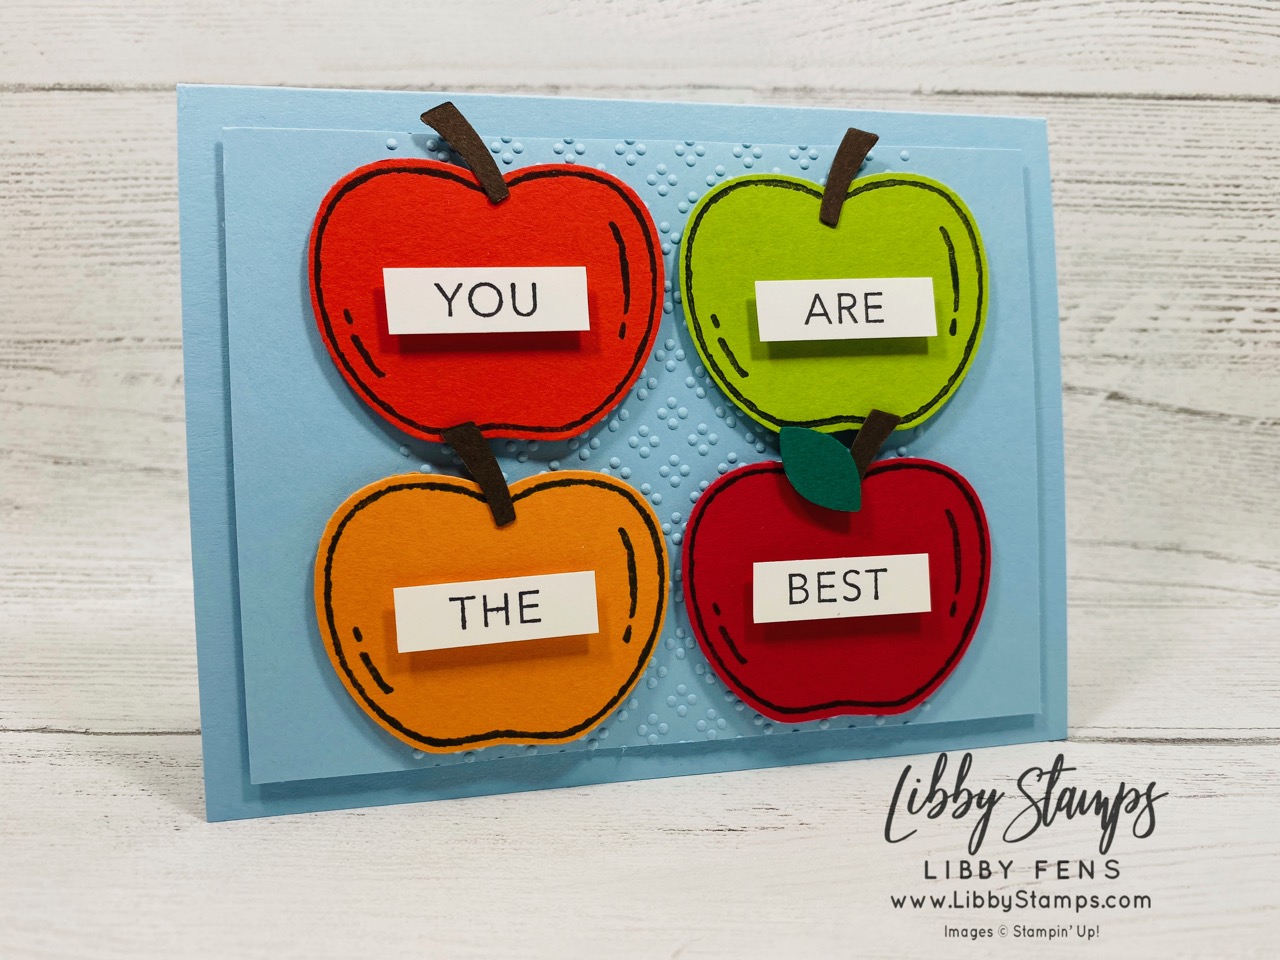 libbystamps, Stampin' Up!, Harvest Hellos, Tasteful Touches, Wrapped In Texture EF, Apple Builder Punch, Classic Label Punch, BFBH, Blogging Friends Blog Hop